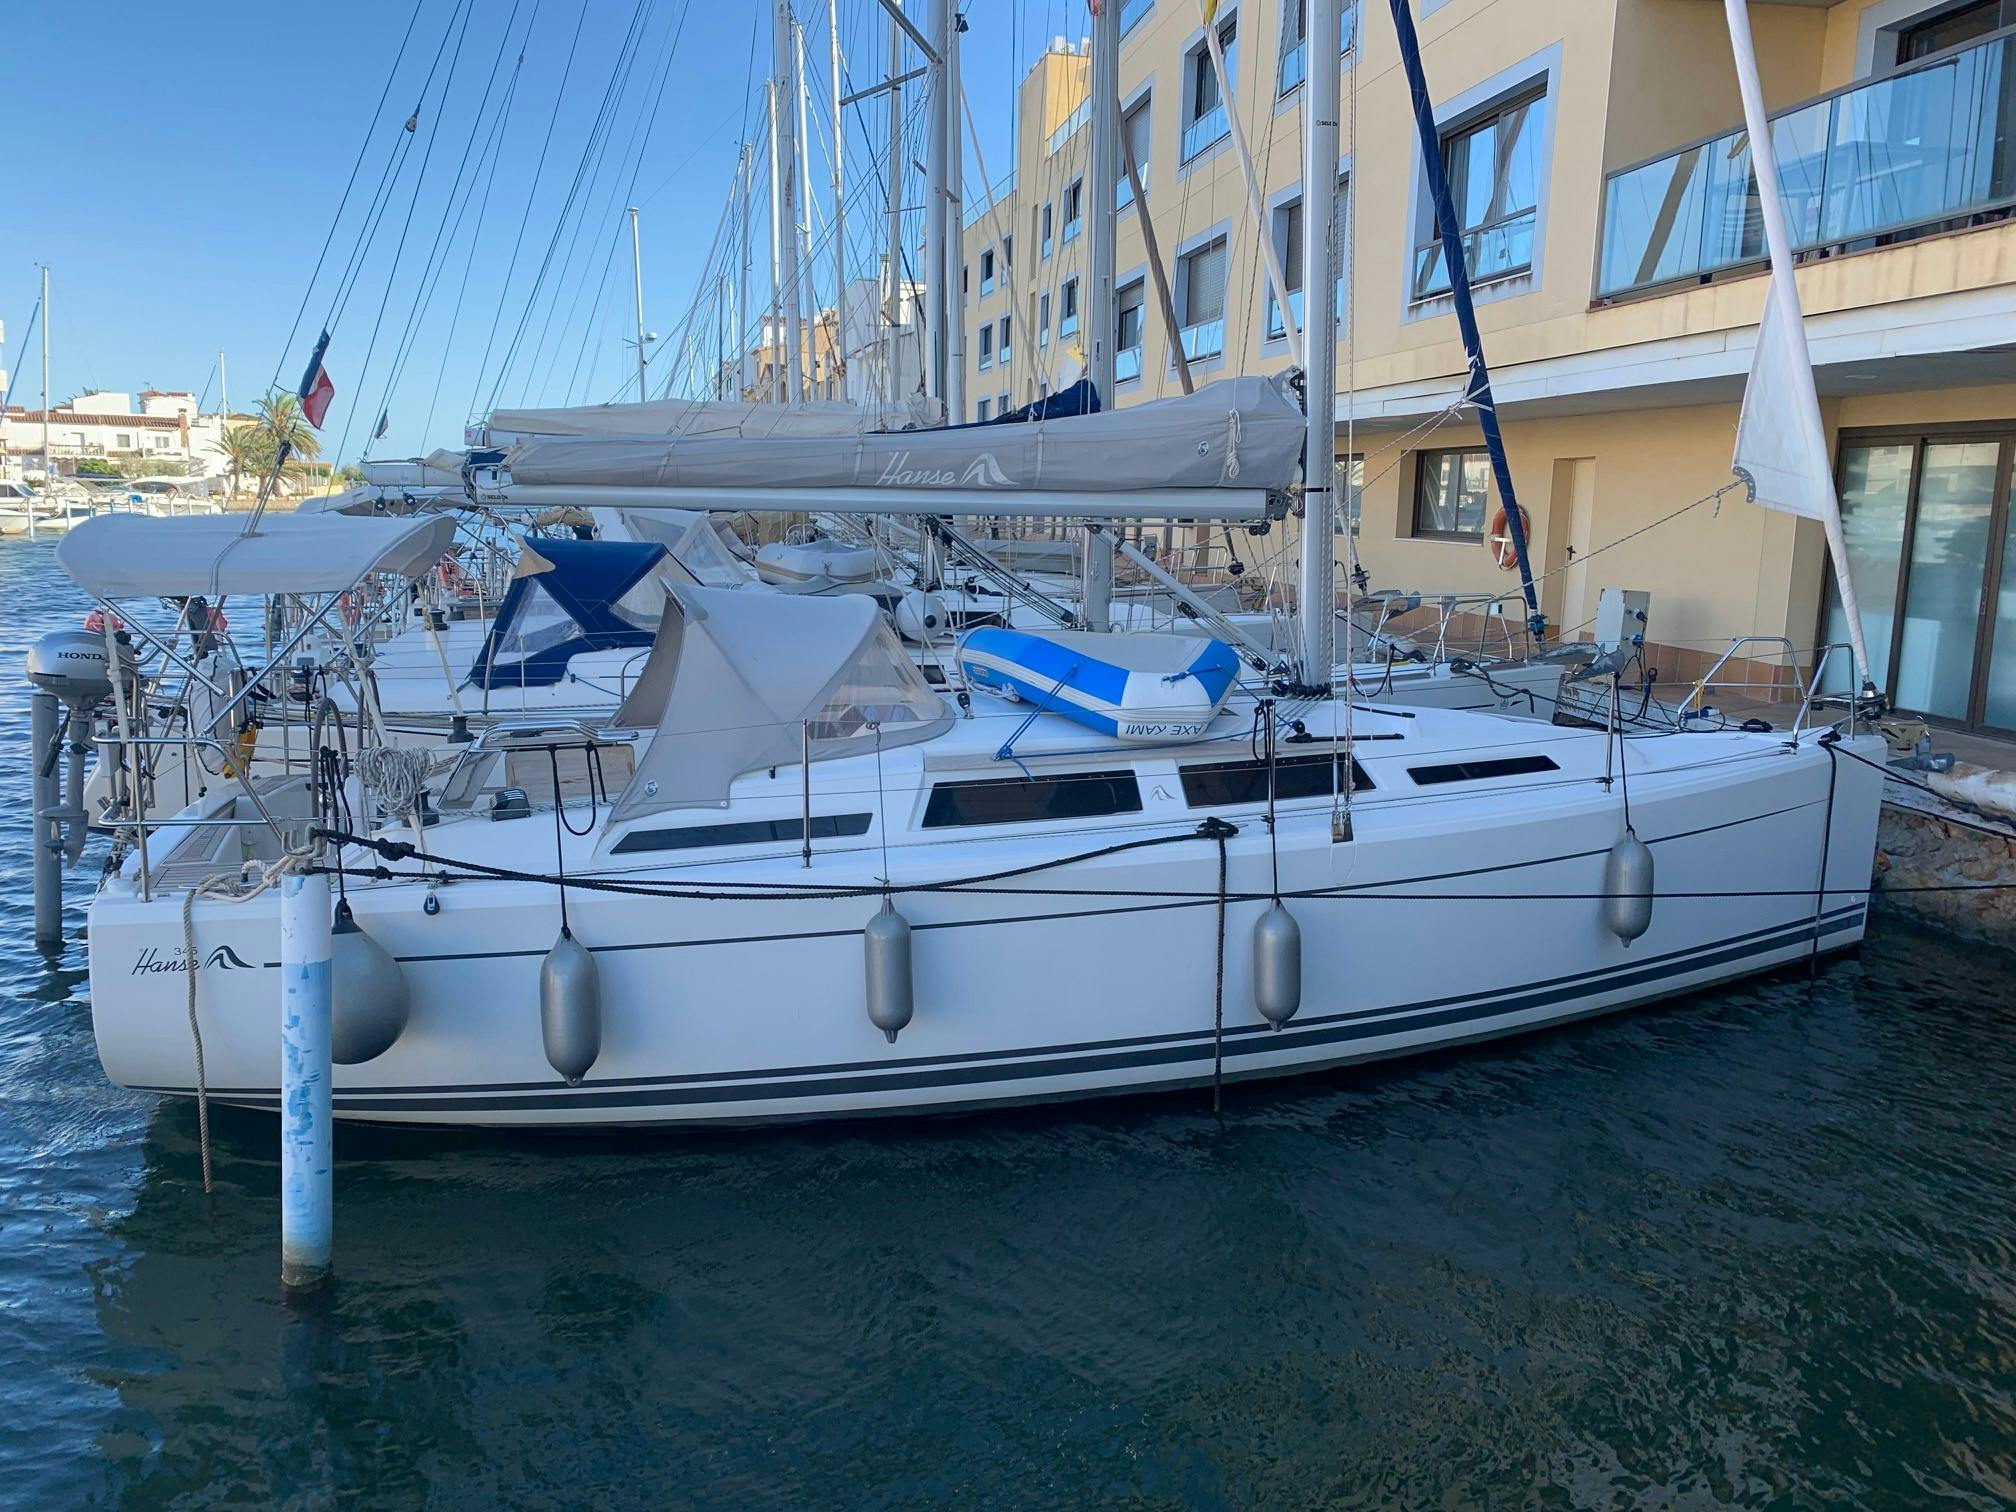 Book Hanse 345 Sailing yacht for bareboat charter in Roses, Empuriabrava marina, Catalonia, Spain with TripYacht!, picture 1